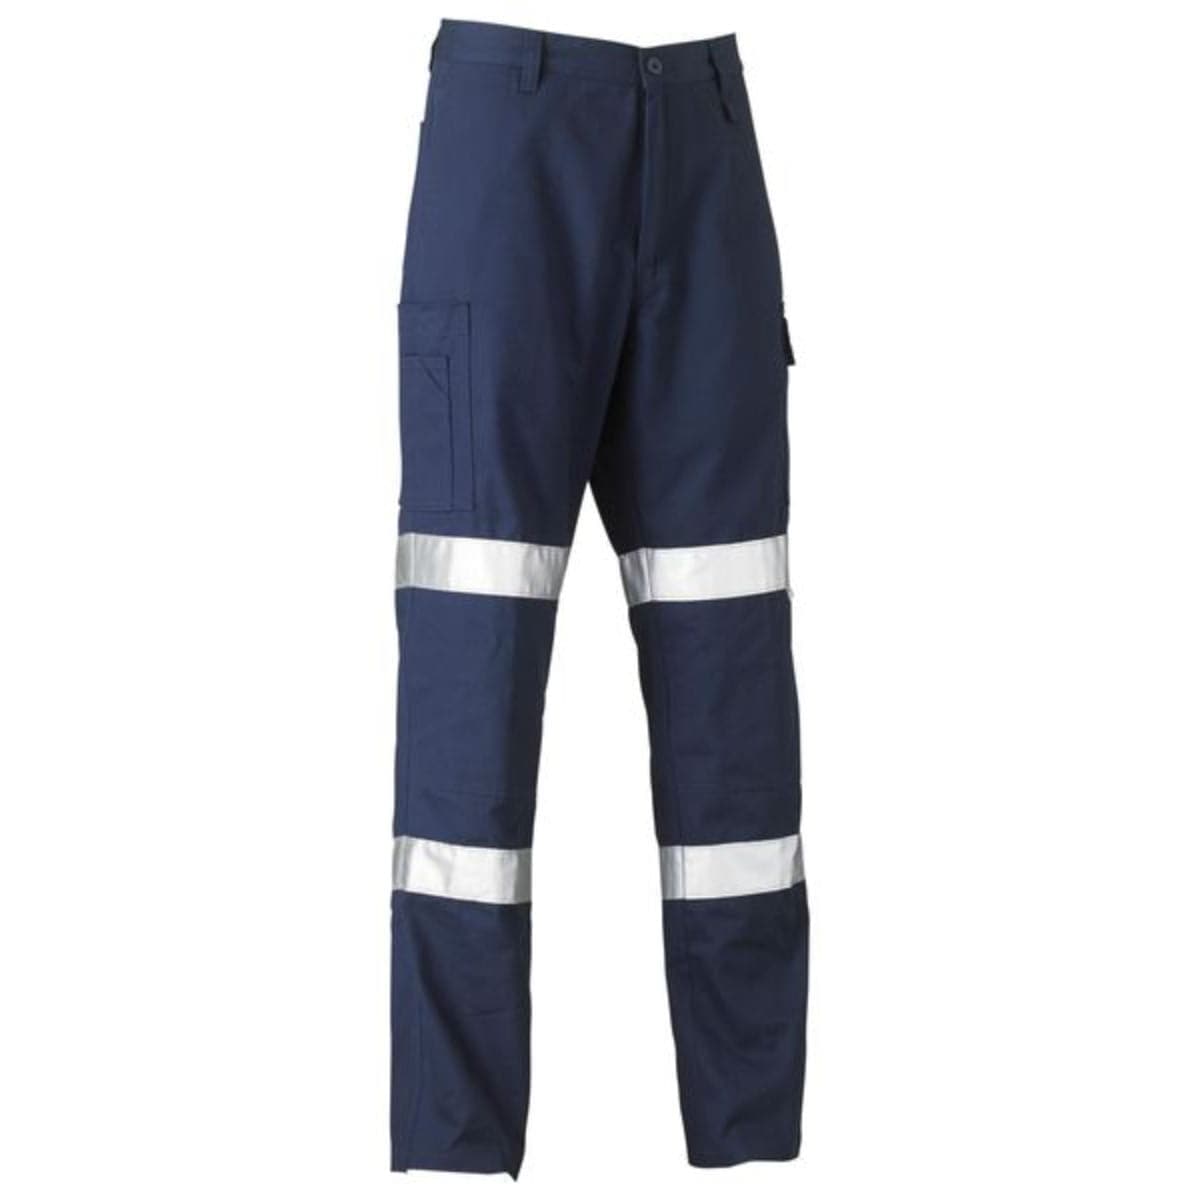 Bisley Taped Biomotion Cool Lightweight Utility Pants BP6999T